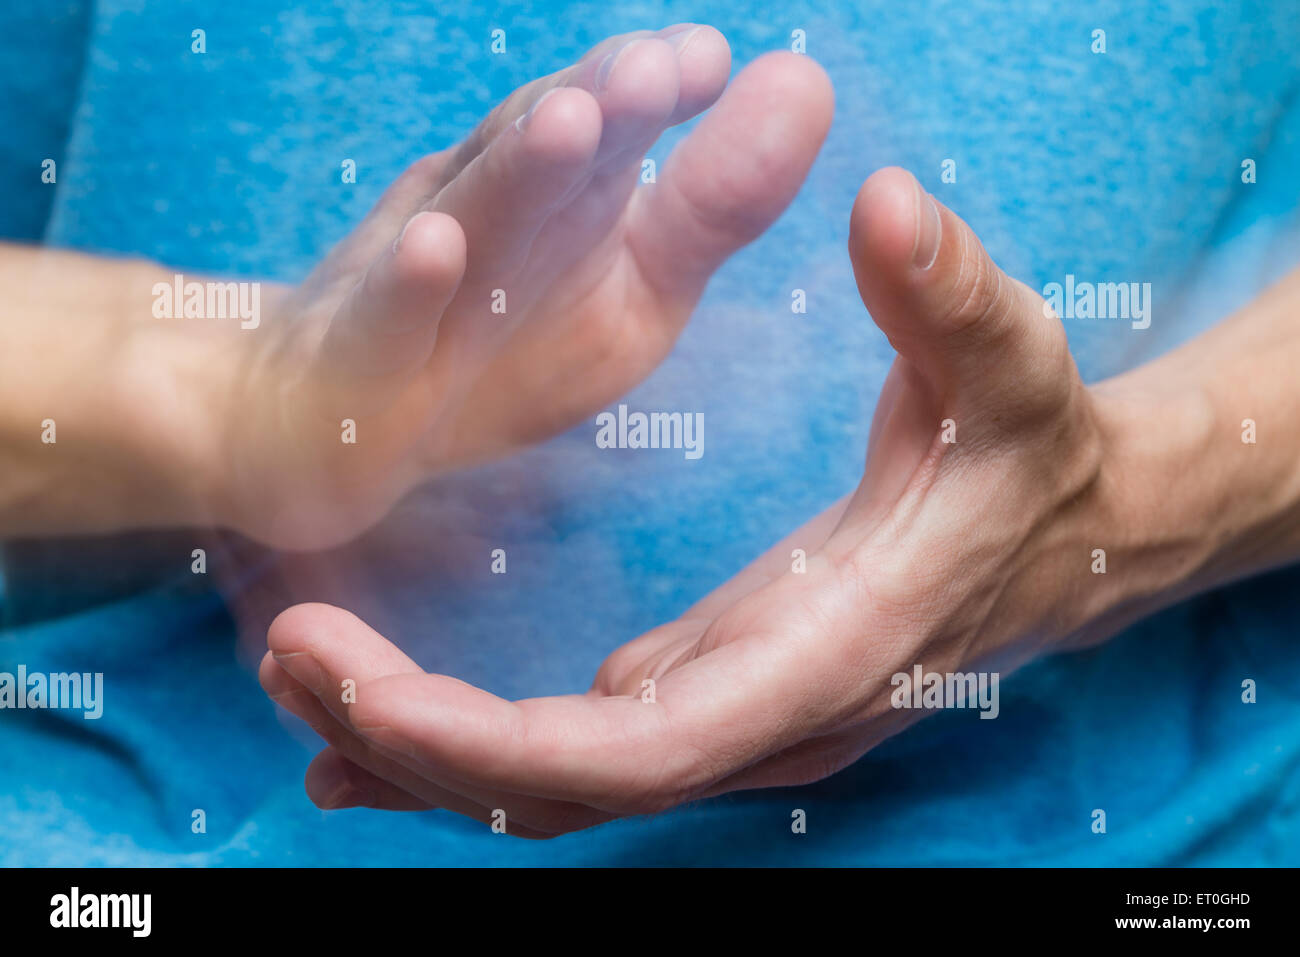 A man's hands clapping with a light blue shirt in the background. Stock Photo